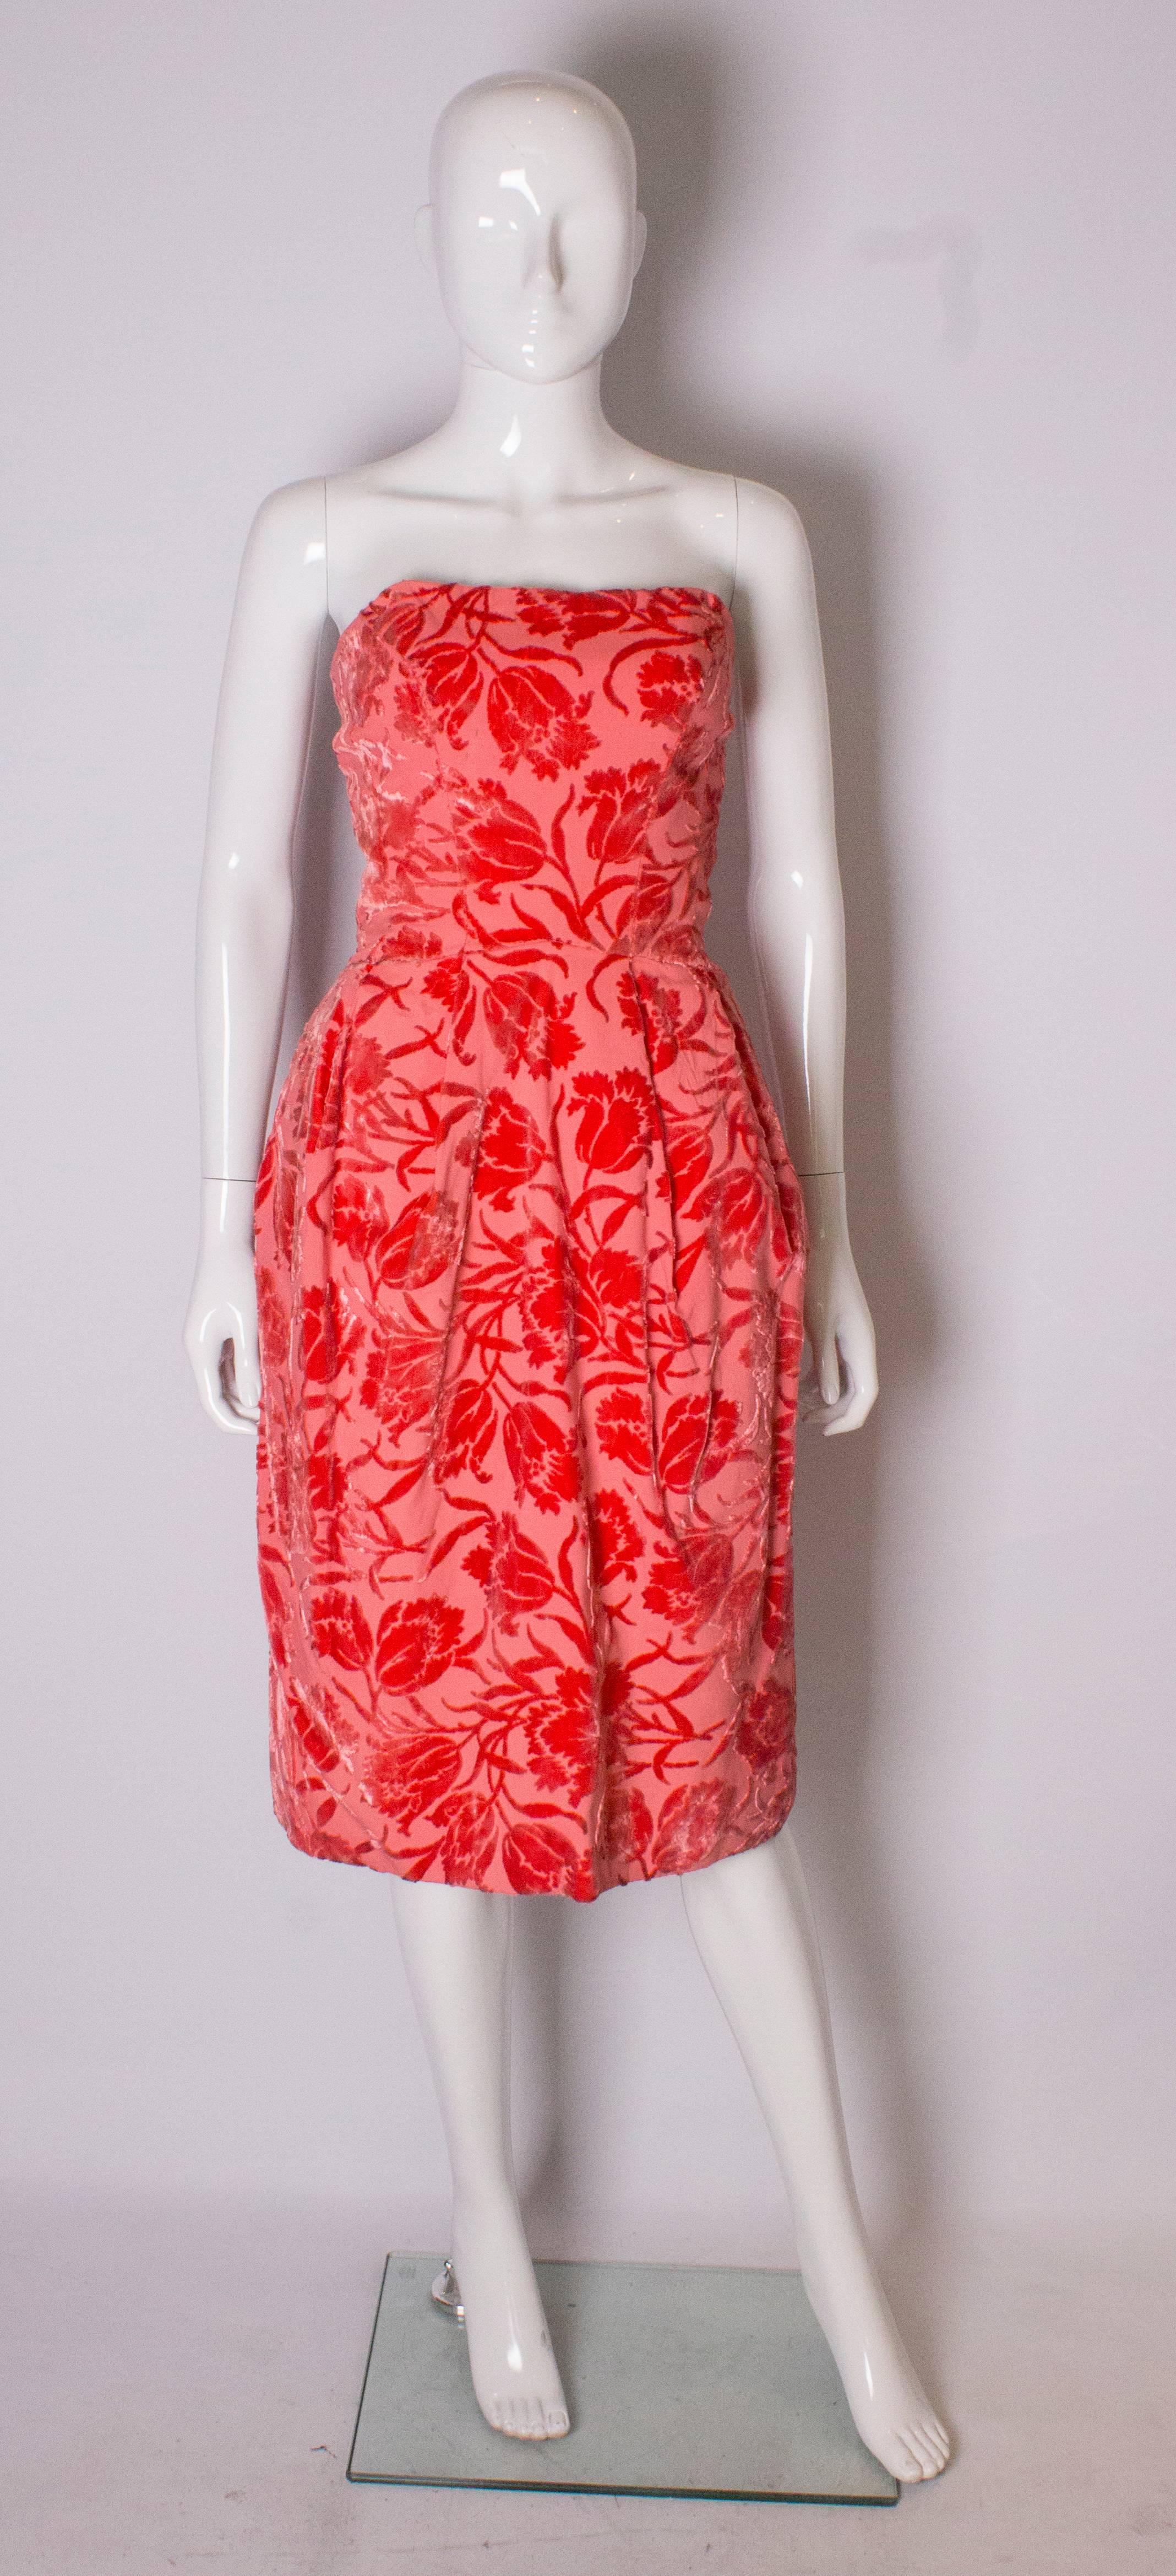 A pretty party dress in a coral pink coloured devore velvet. The dress is boned at the bust area, has a tulip shape skirt, and  is fully lined,with a central back zip.

